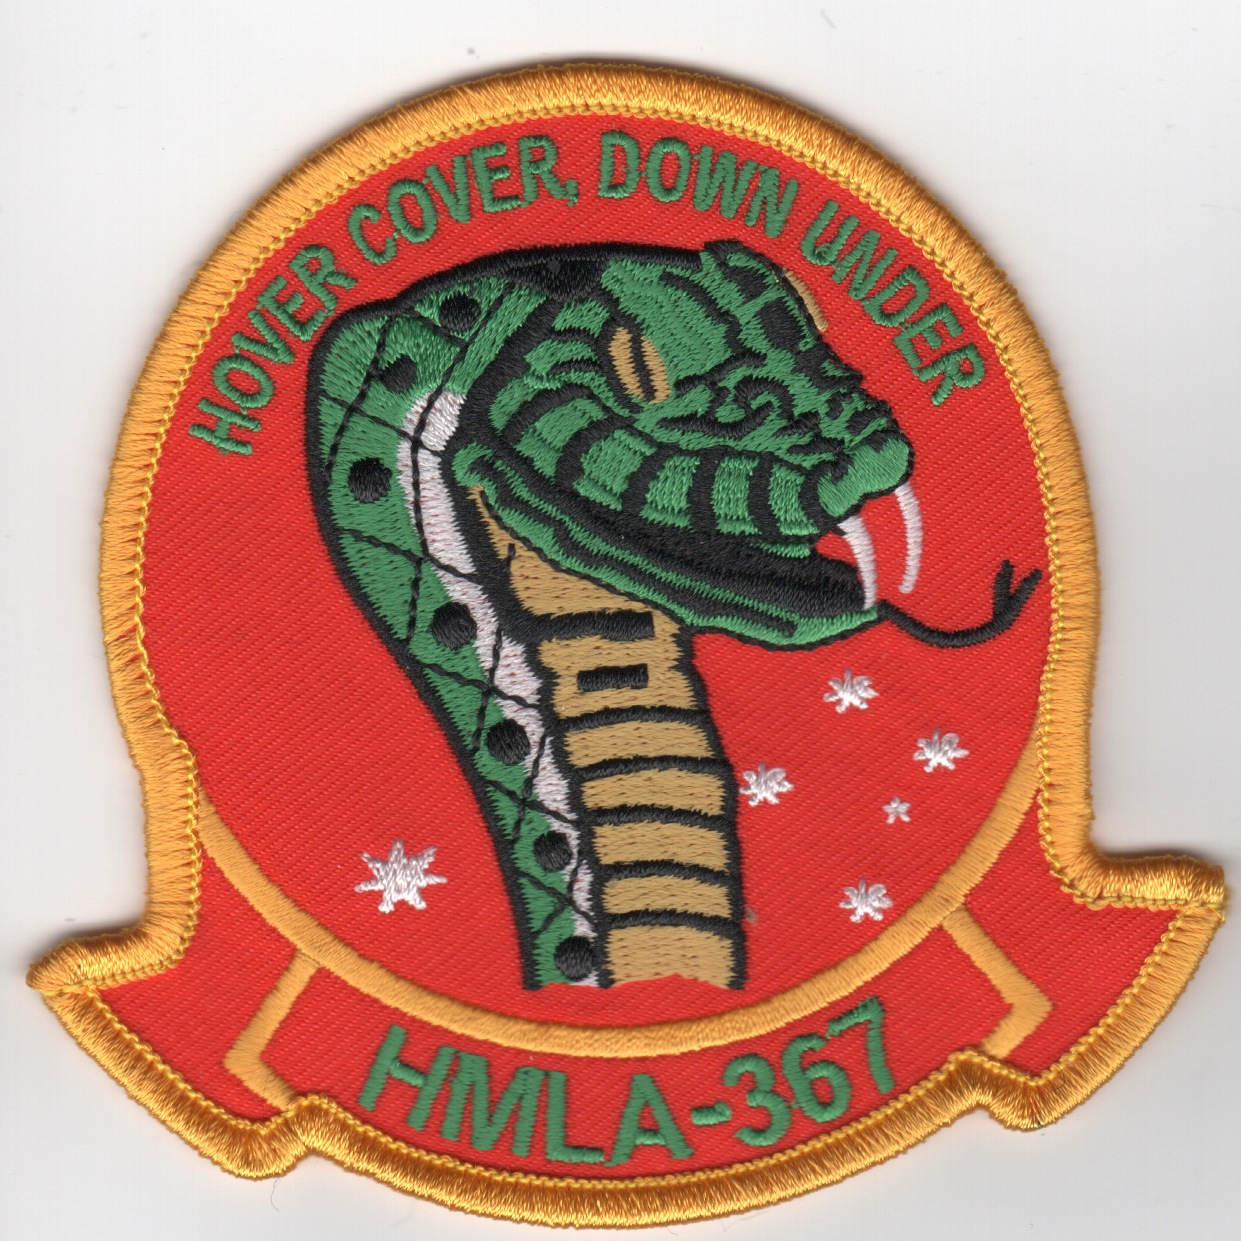 HMLA-367 'Hover Cover, Down Under' (Red)